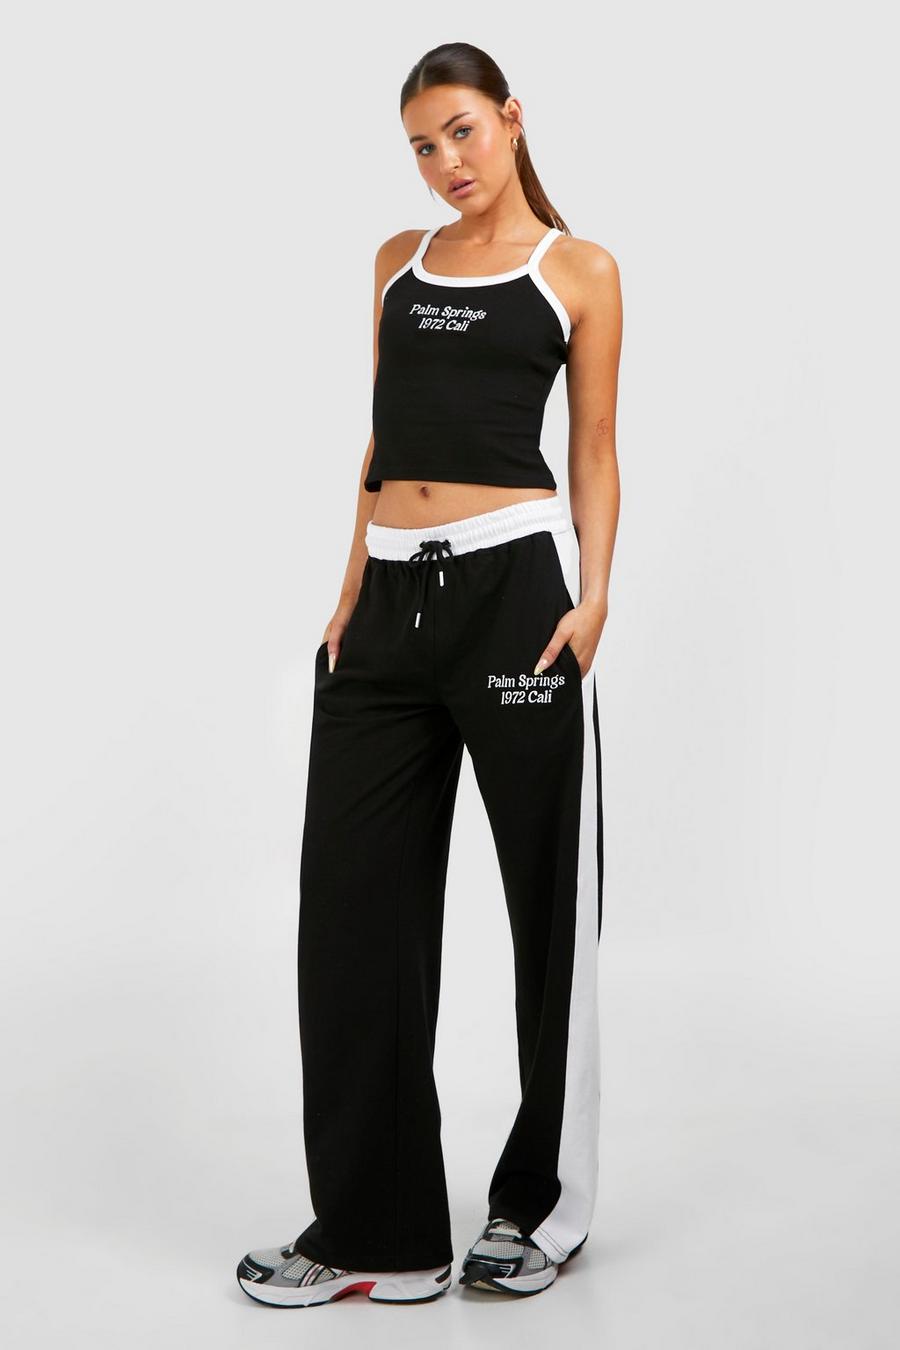 Black Palm Springs Contrast Printed Tank Top Top And Jogger Set